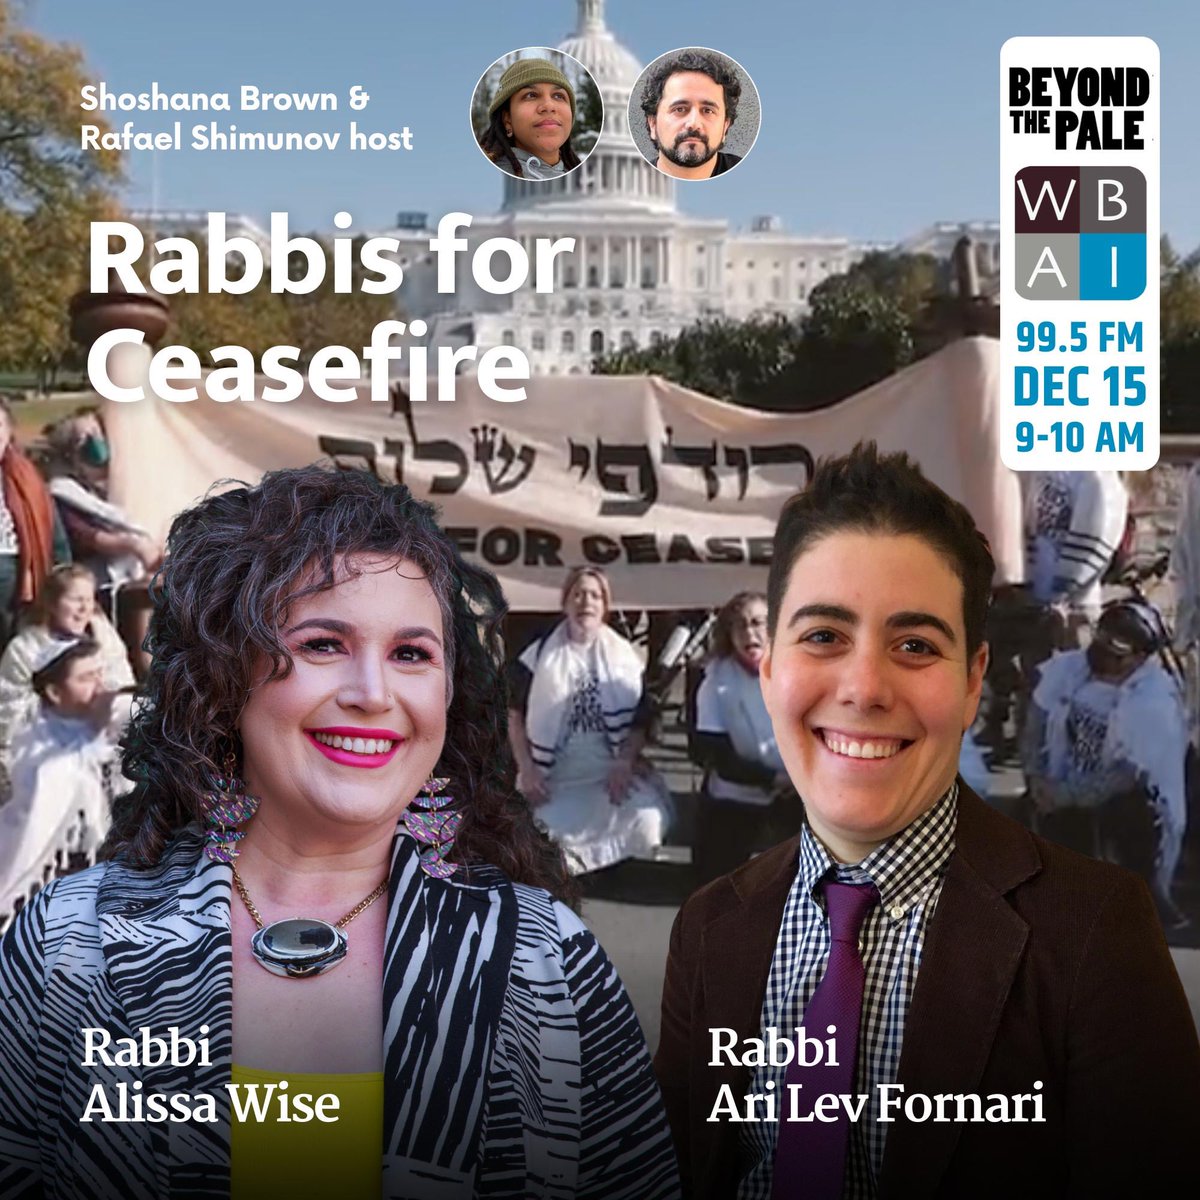 Today’s @BeyondThePaleFM was so popular that @WBAI will be rebroadcasting it again across NYC airwaves at 5PM on 99.5 FM. Shabbat shalom and thank you @rodfeishalom